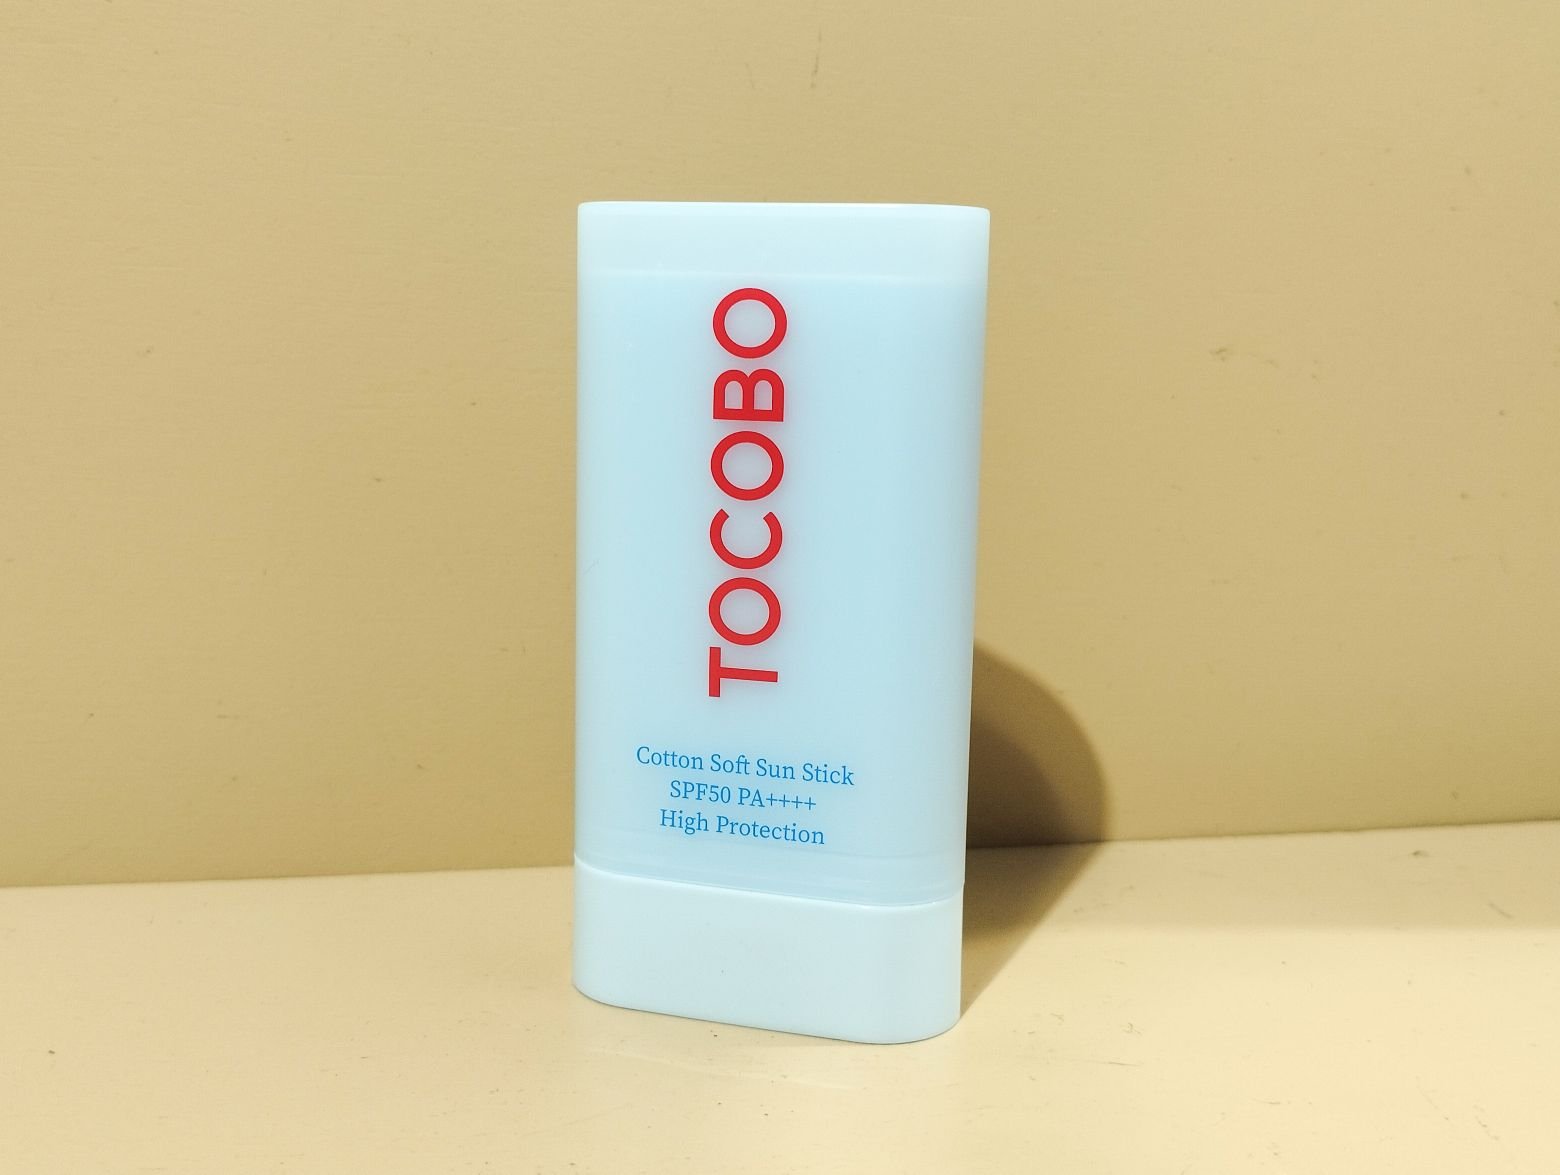 Review Tocobo Cotton Soft Sunstick by theblackdaisies